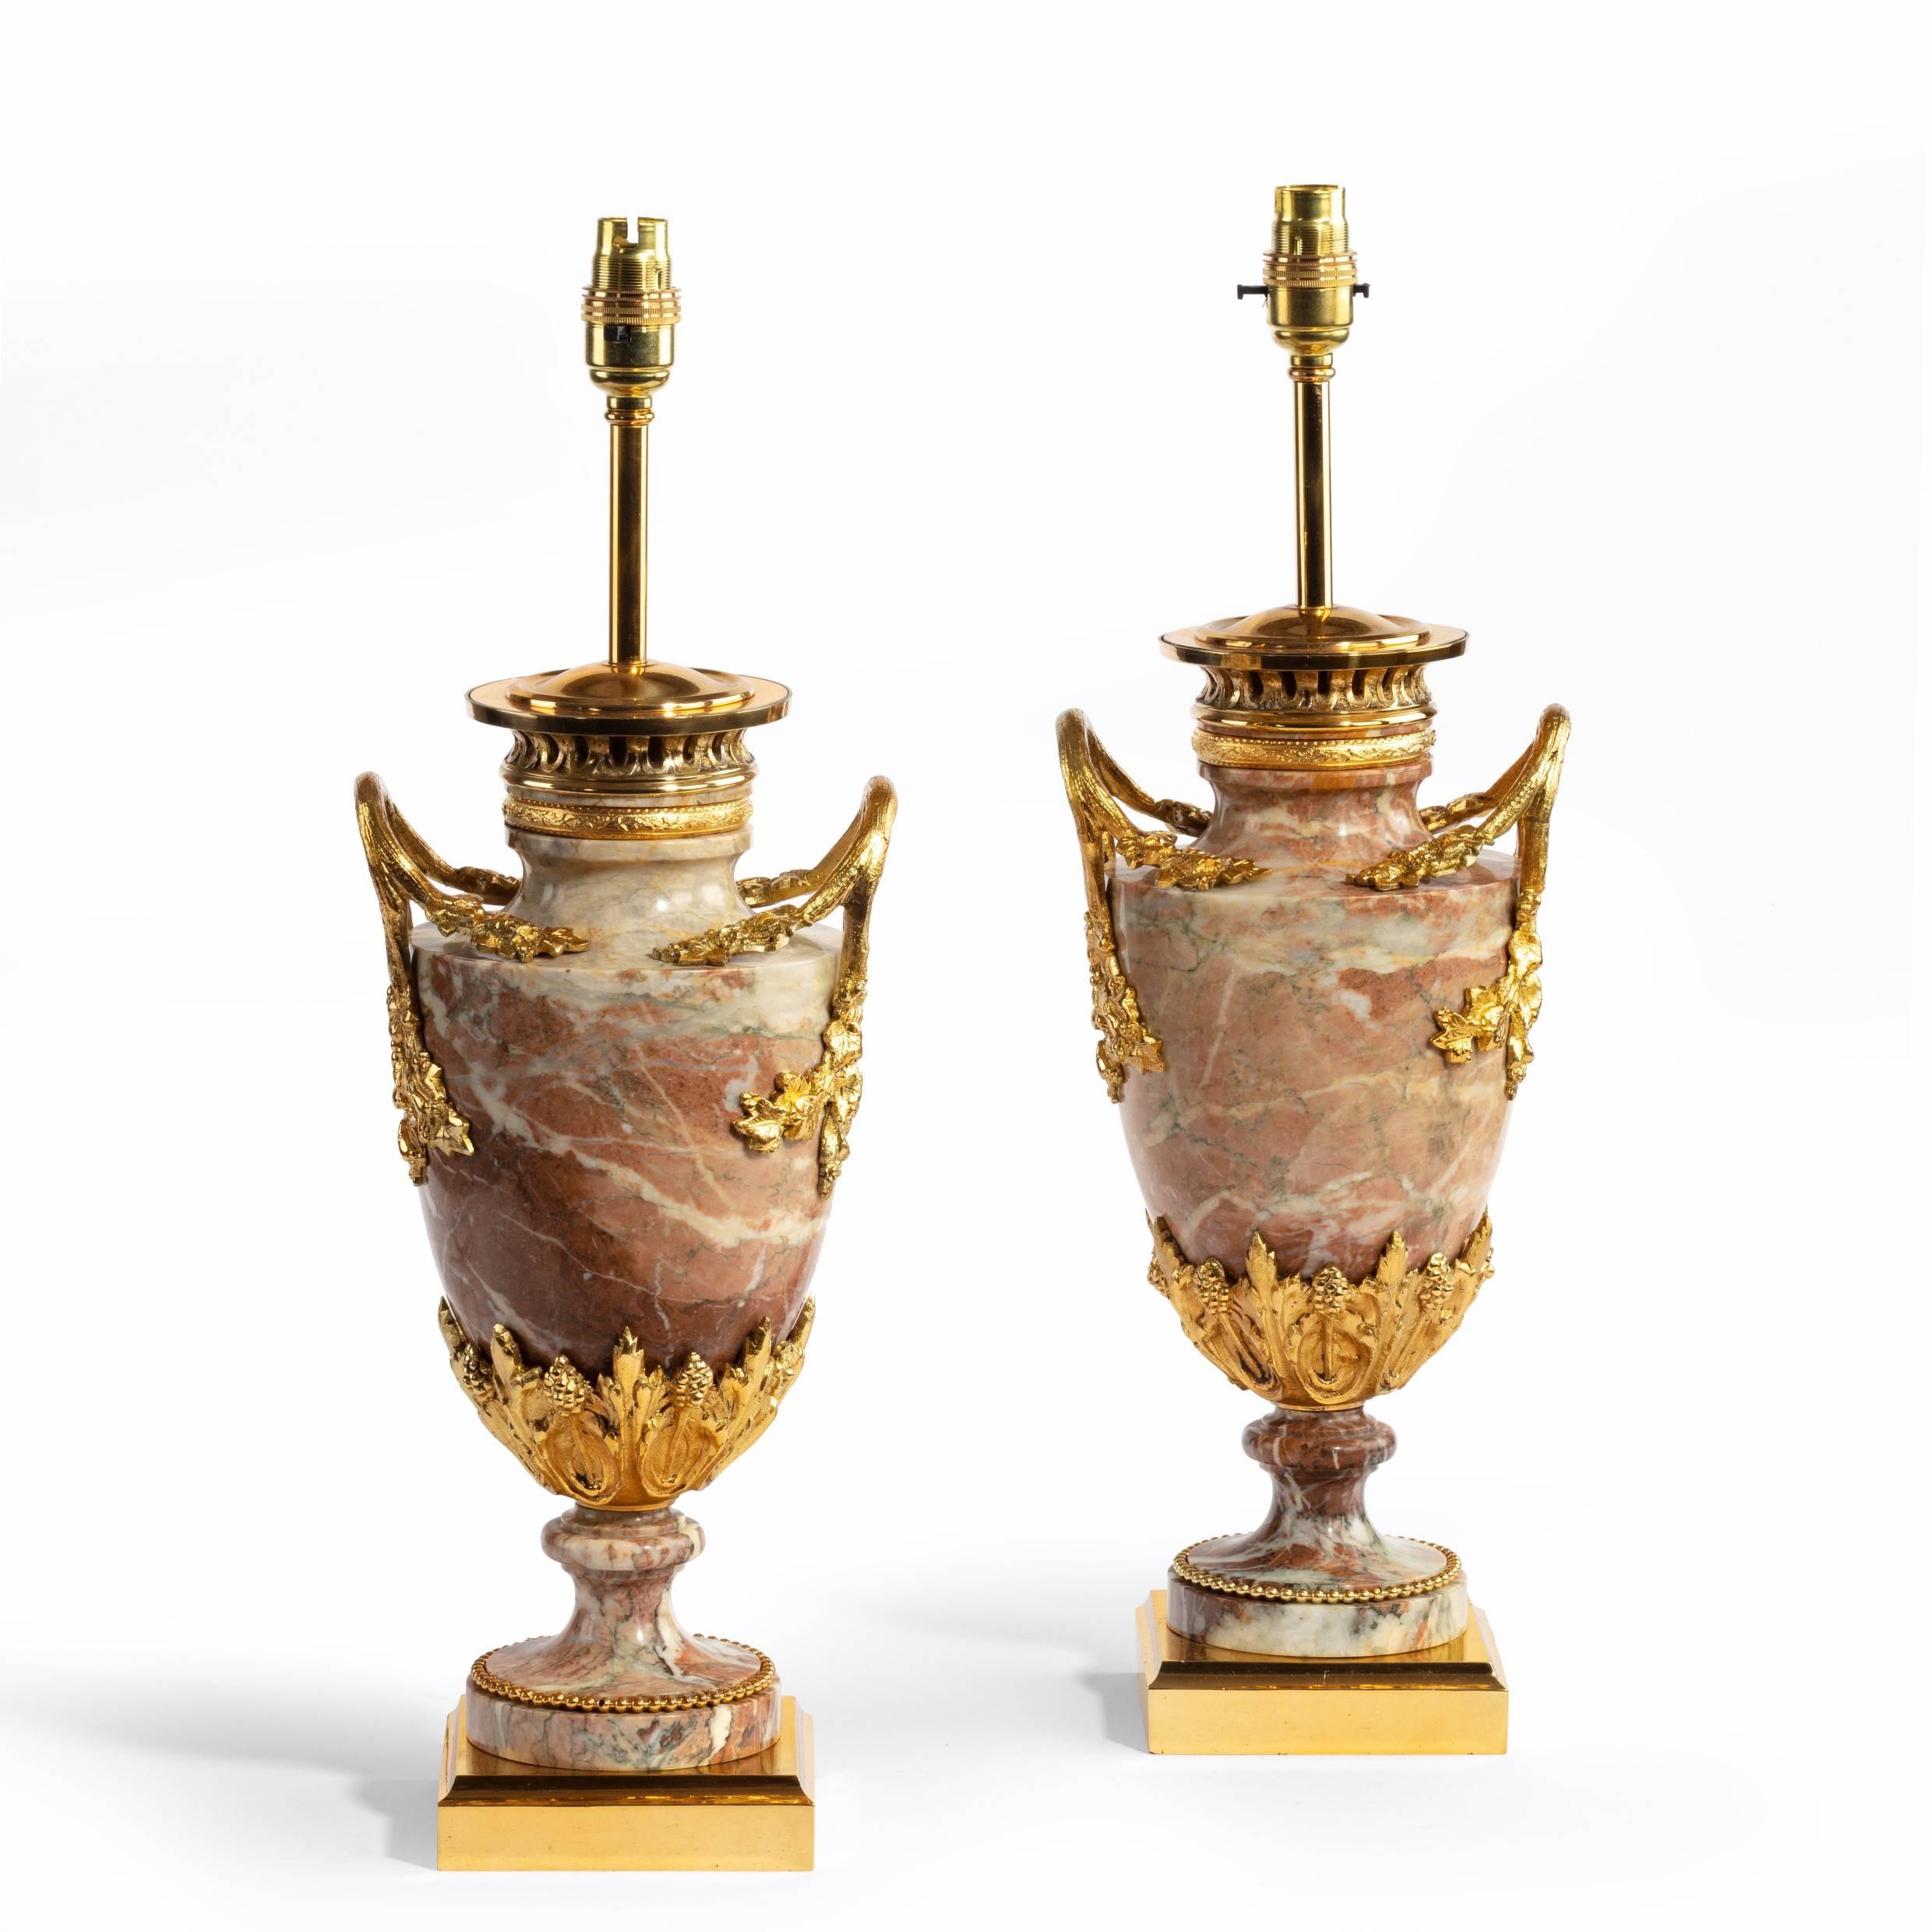 A pair of French marble table lamps, each in the form of a footed vase applied with tall, arched ormolu handles and a band of lanceolate leaves and seed heads around the base, ( adapted from oil lamps for electricity, shades not included.), French,